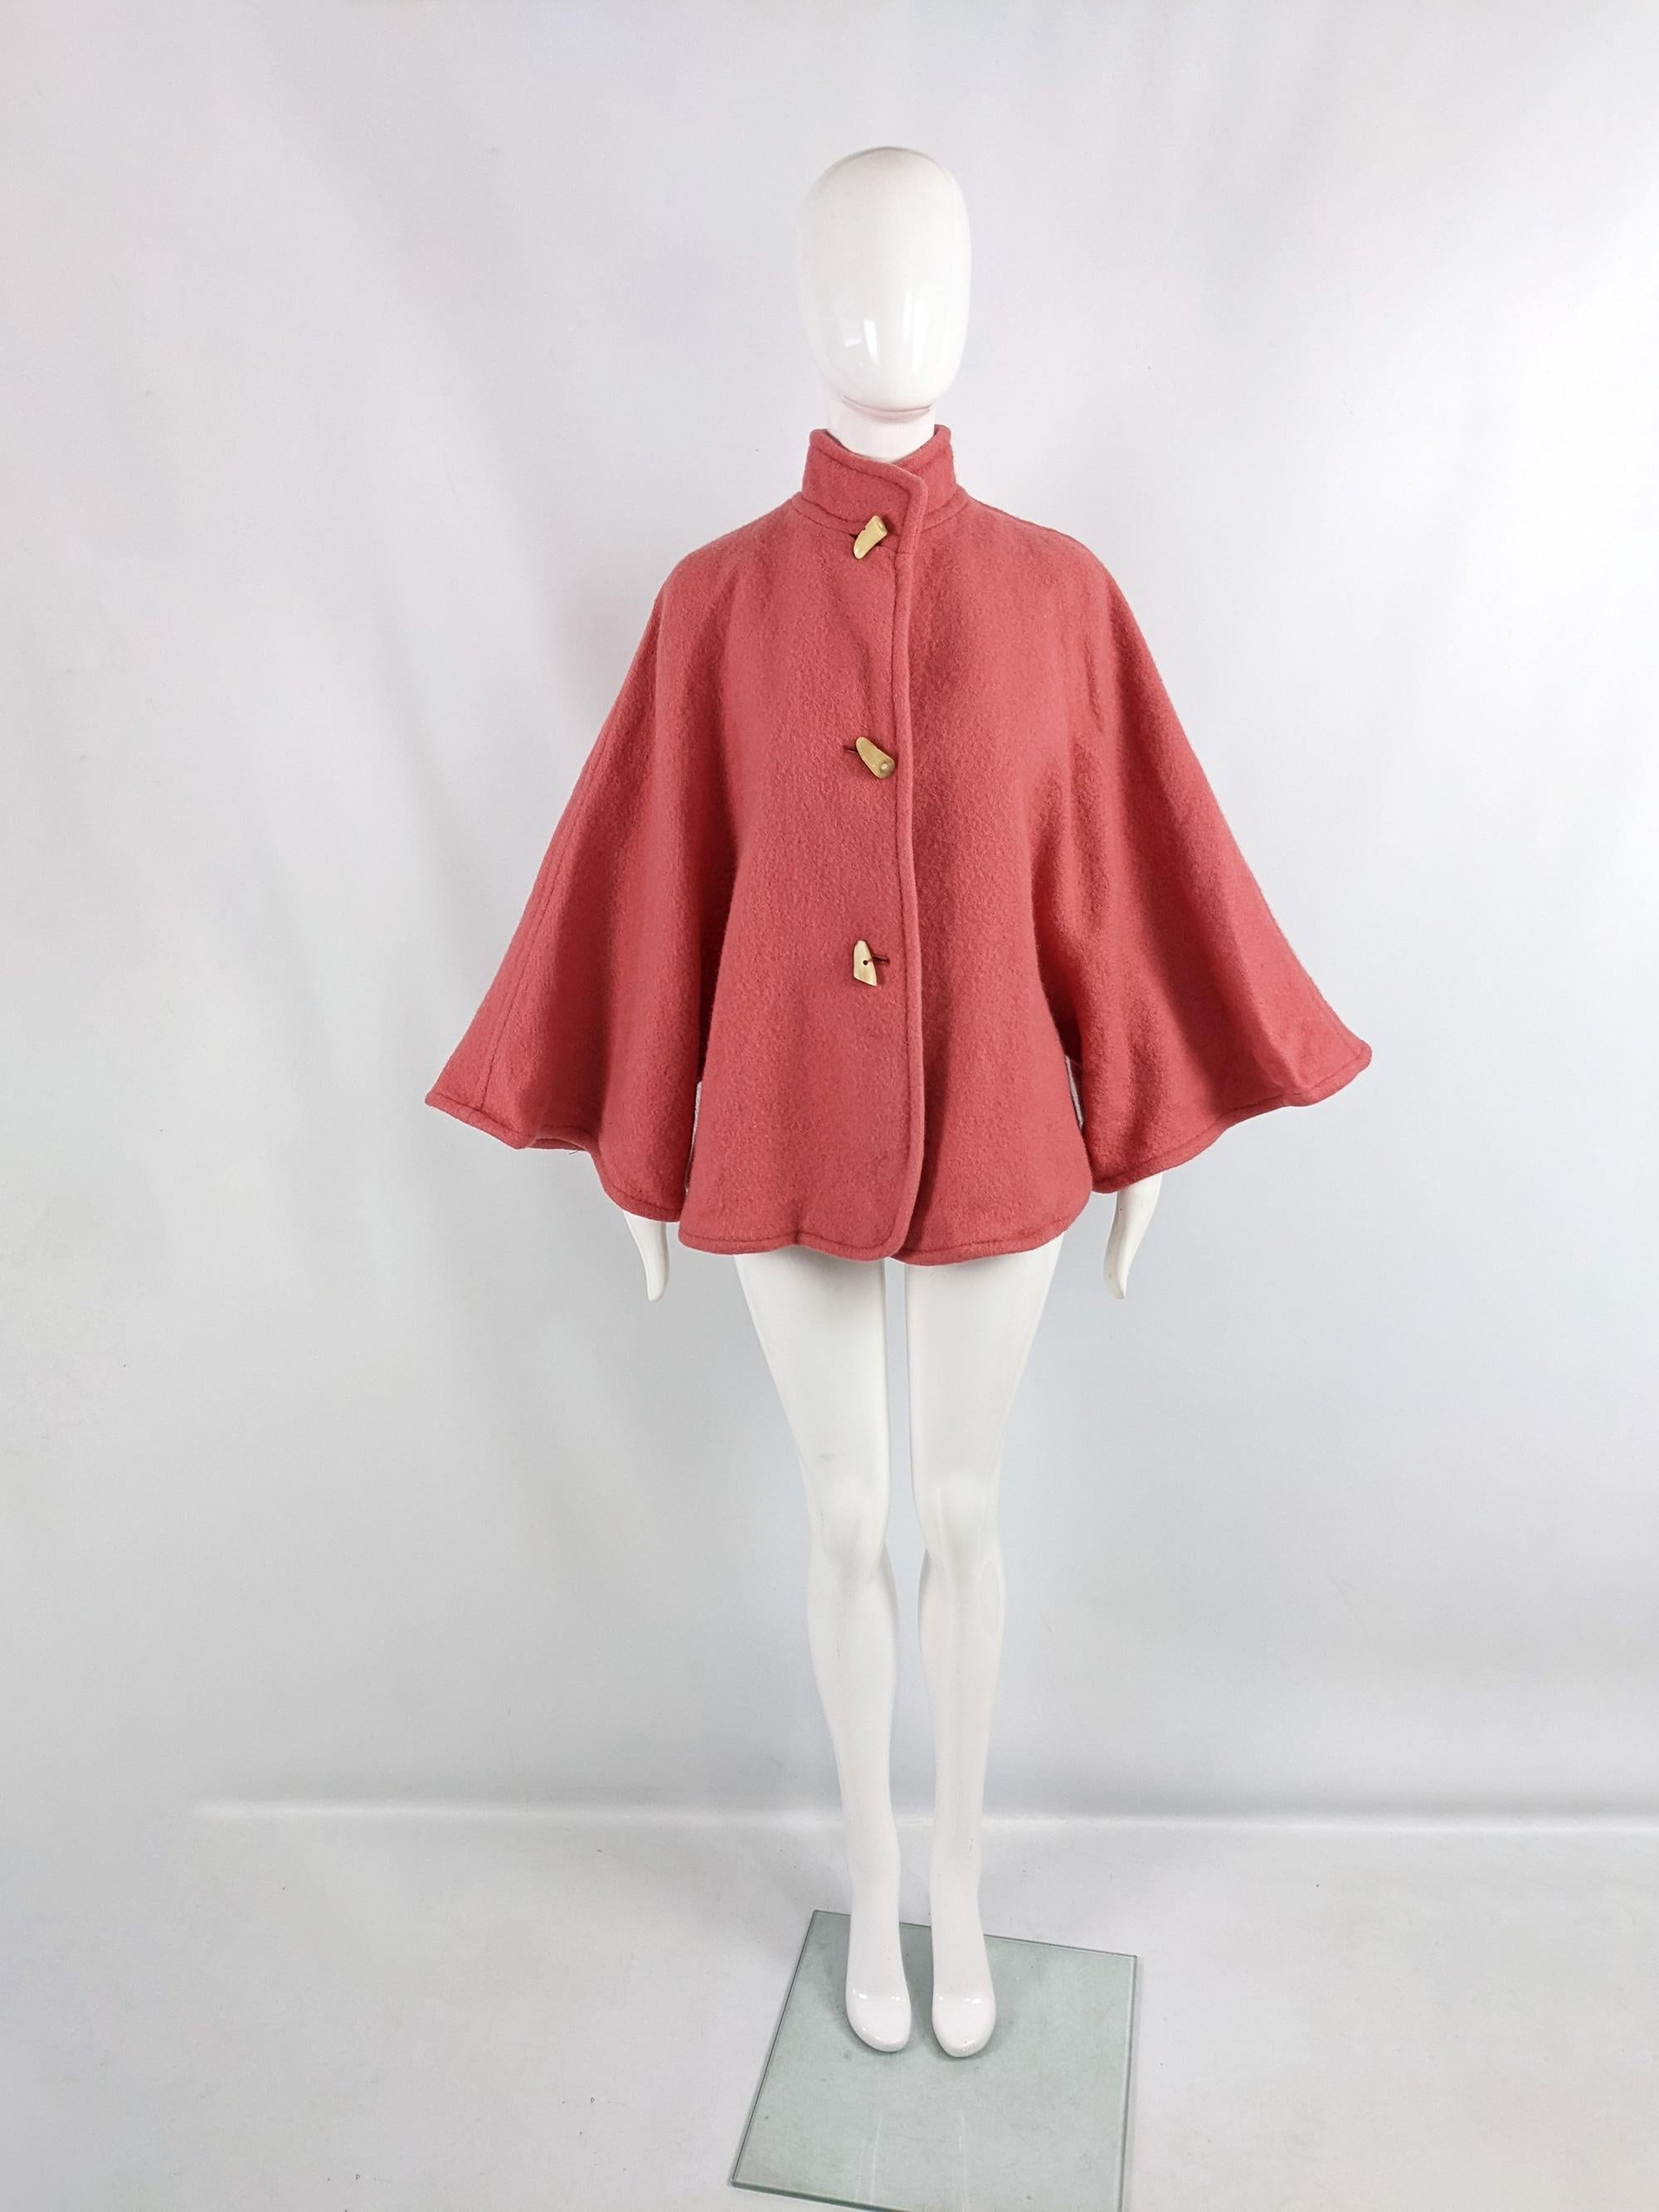 An incredible vintage womens coat from the 80s by luxury French fashion designer, Guy Laroche. In a coral pink thick but fairly lightweight wool and mohair fabric. It has huge wide cut sleeves giving a cape like feel and toggle fastenings down the